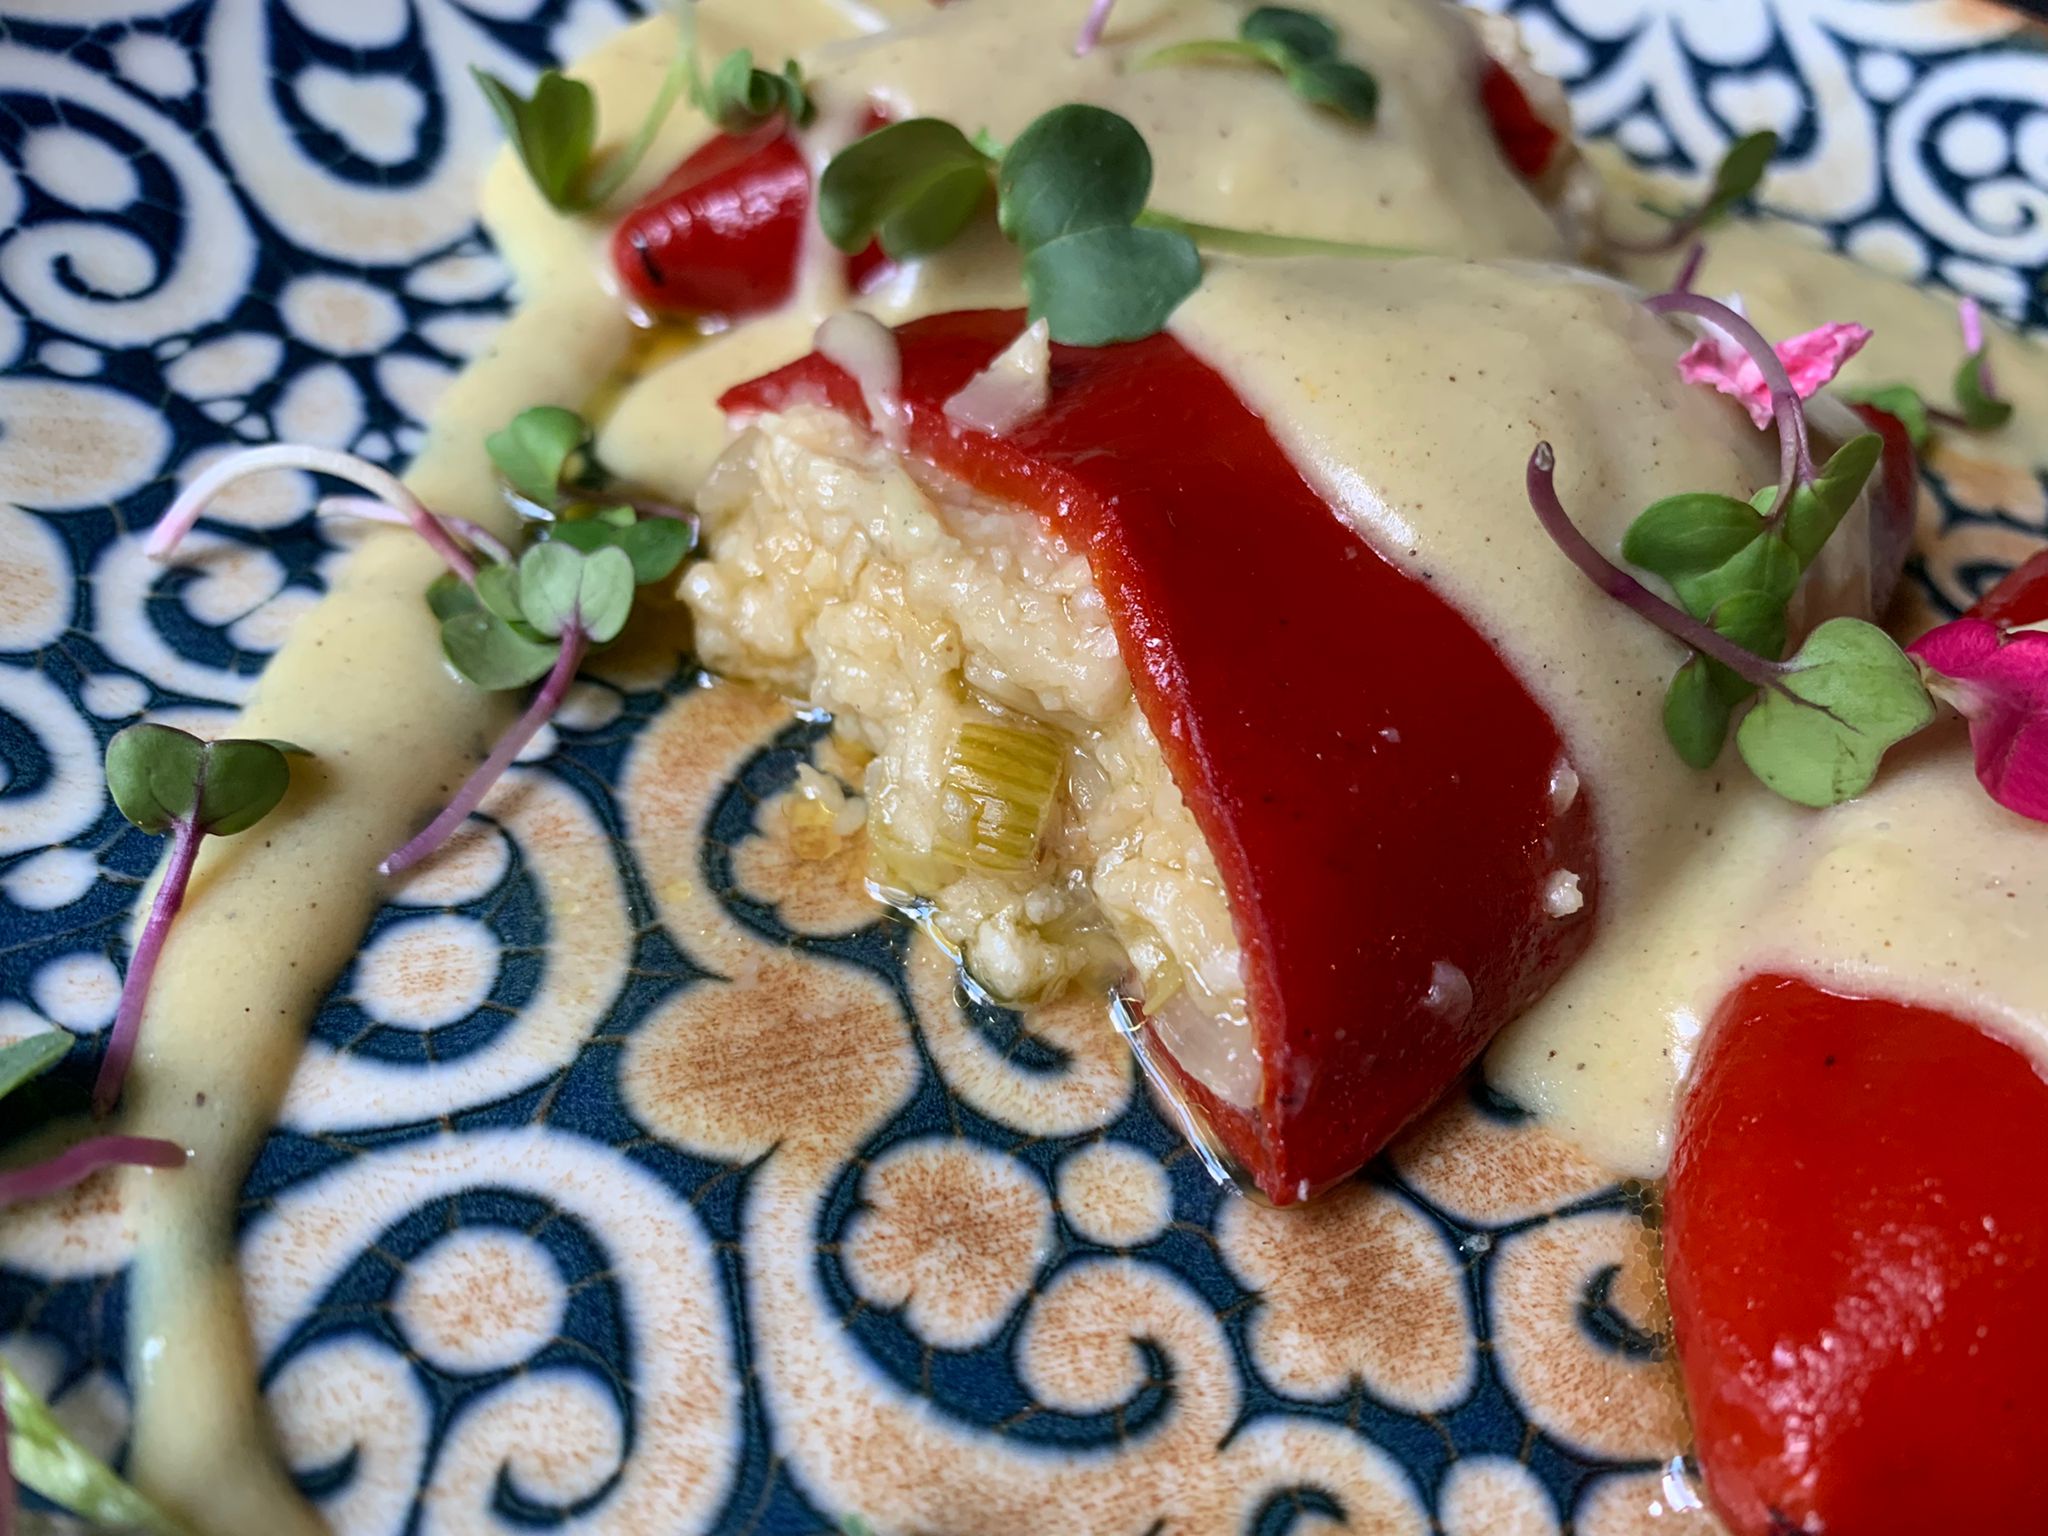 Piquillo peppers with vegetables and bechamel sauce (4 units)